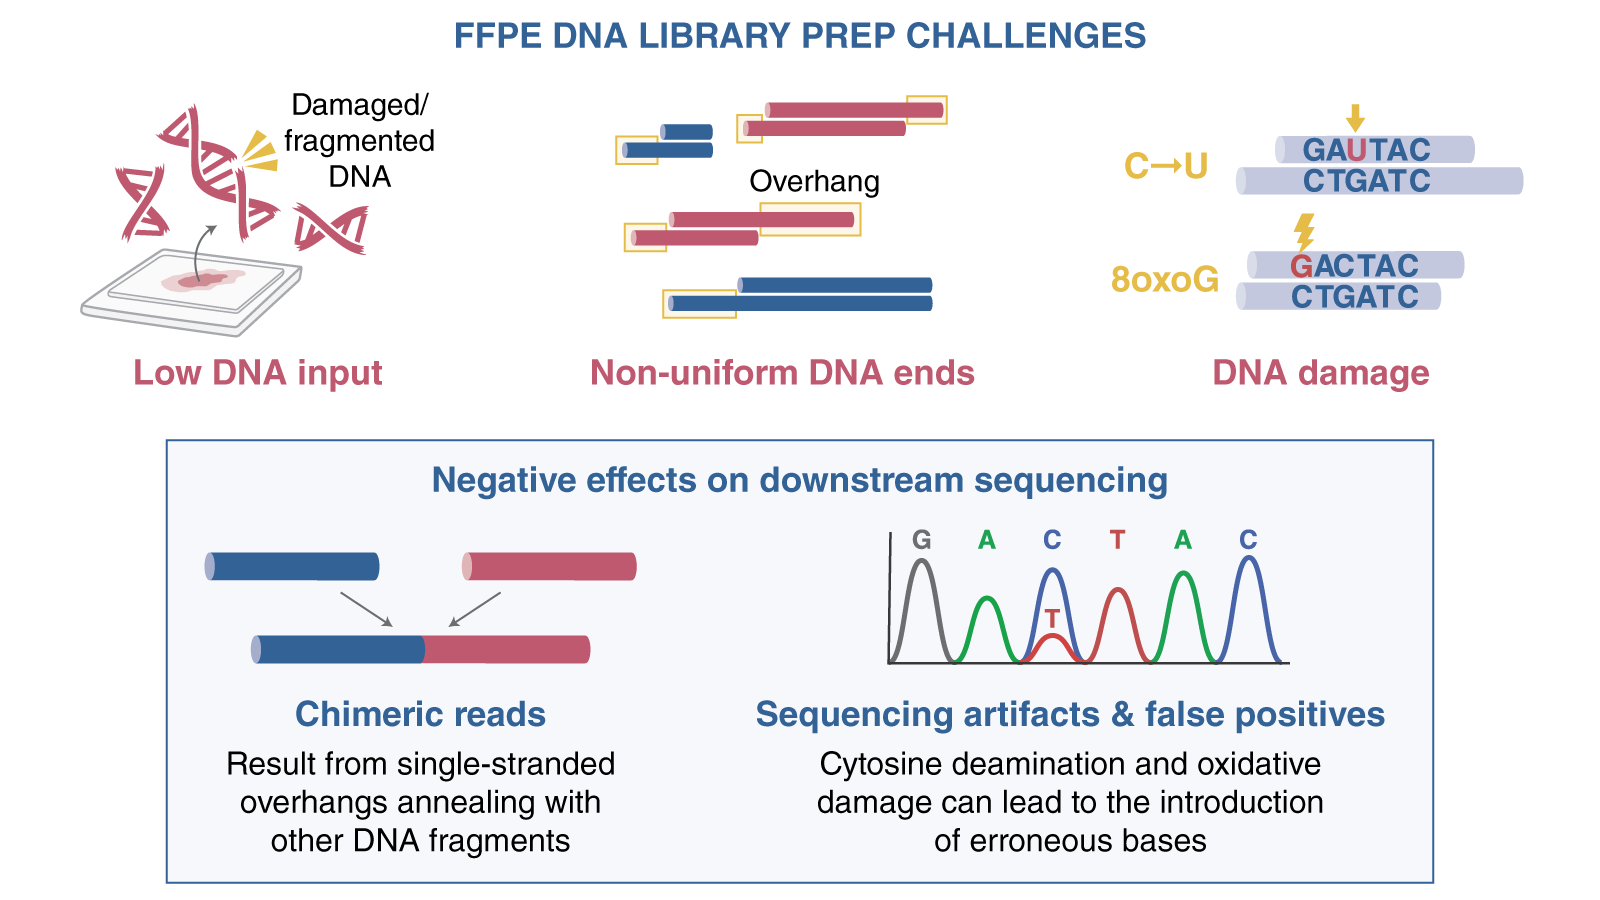 annotated infographic outlining challenges of work with FFPE DNA